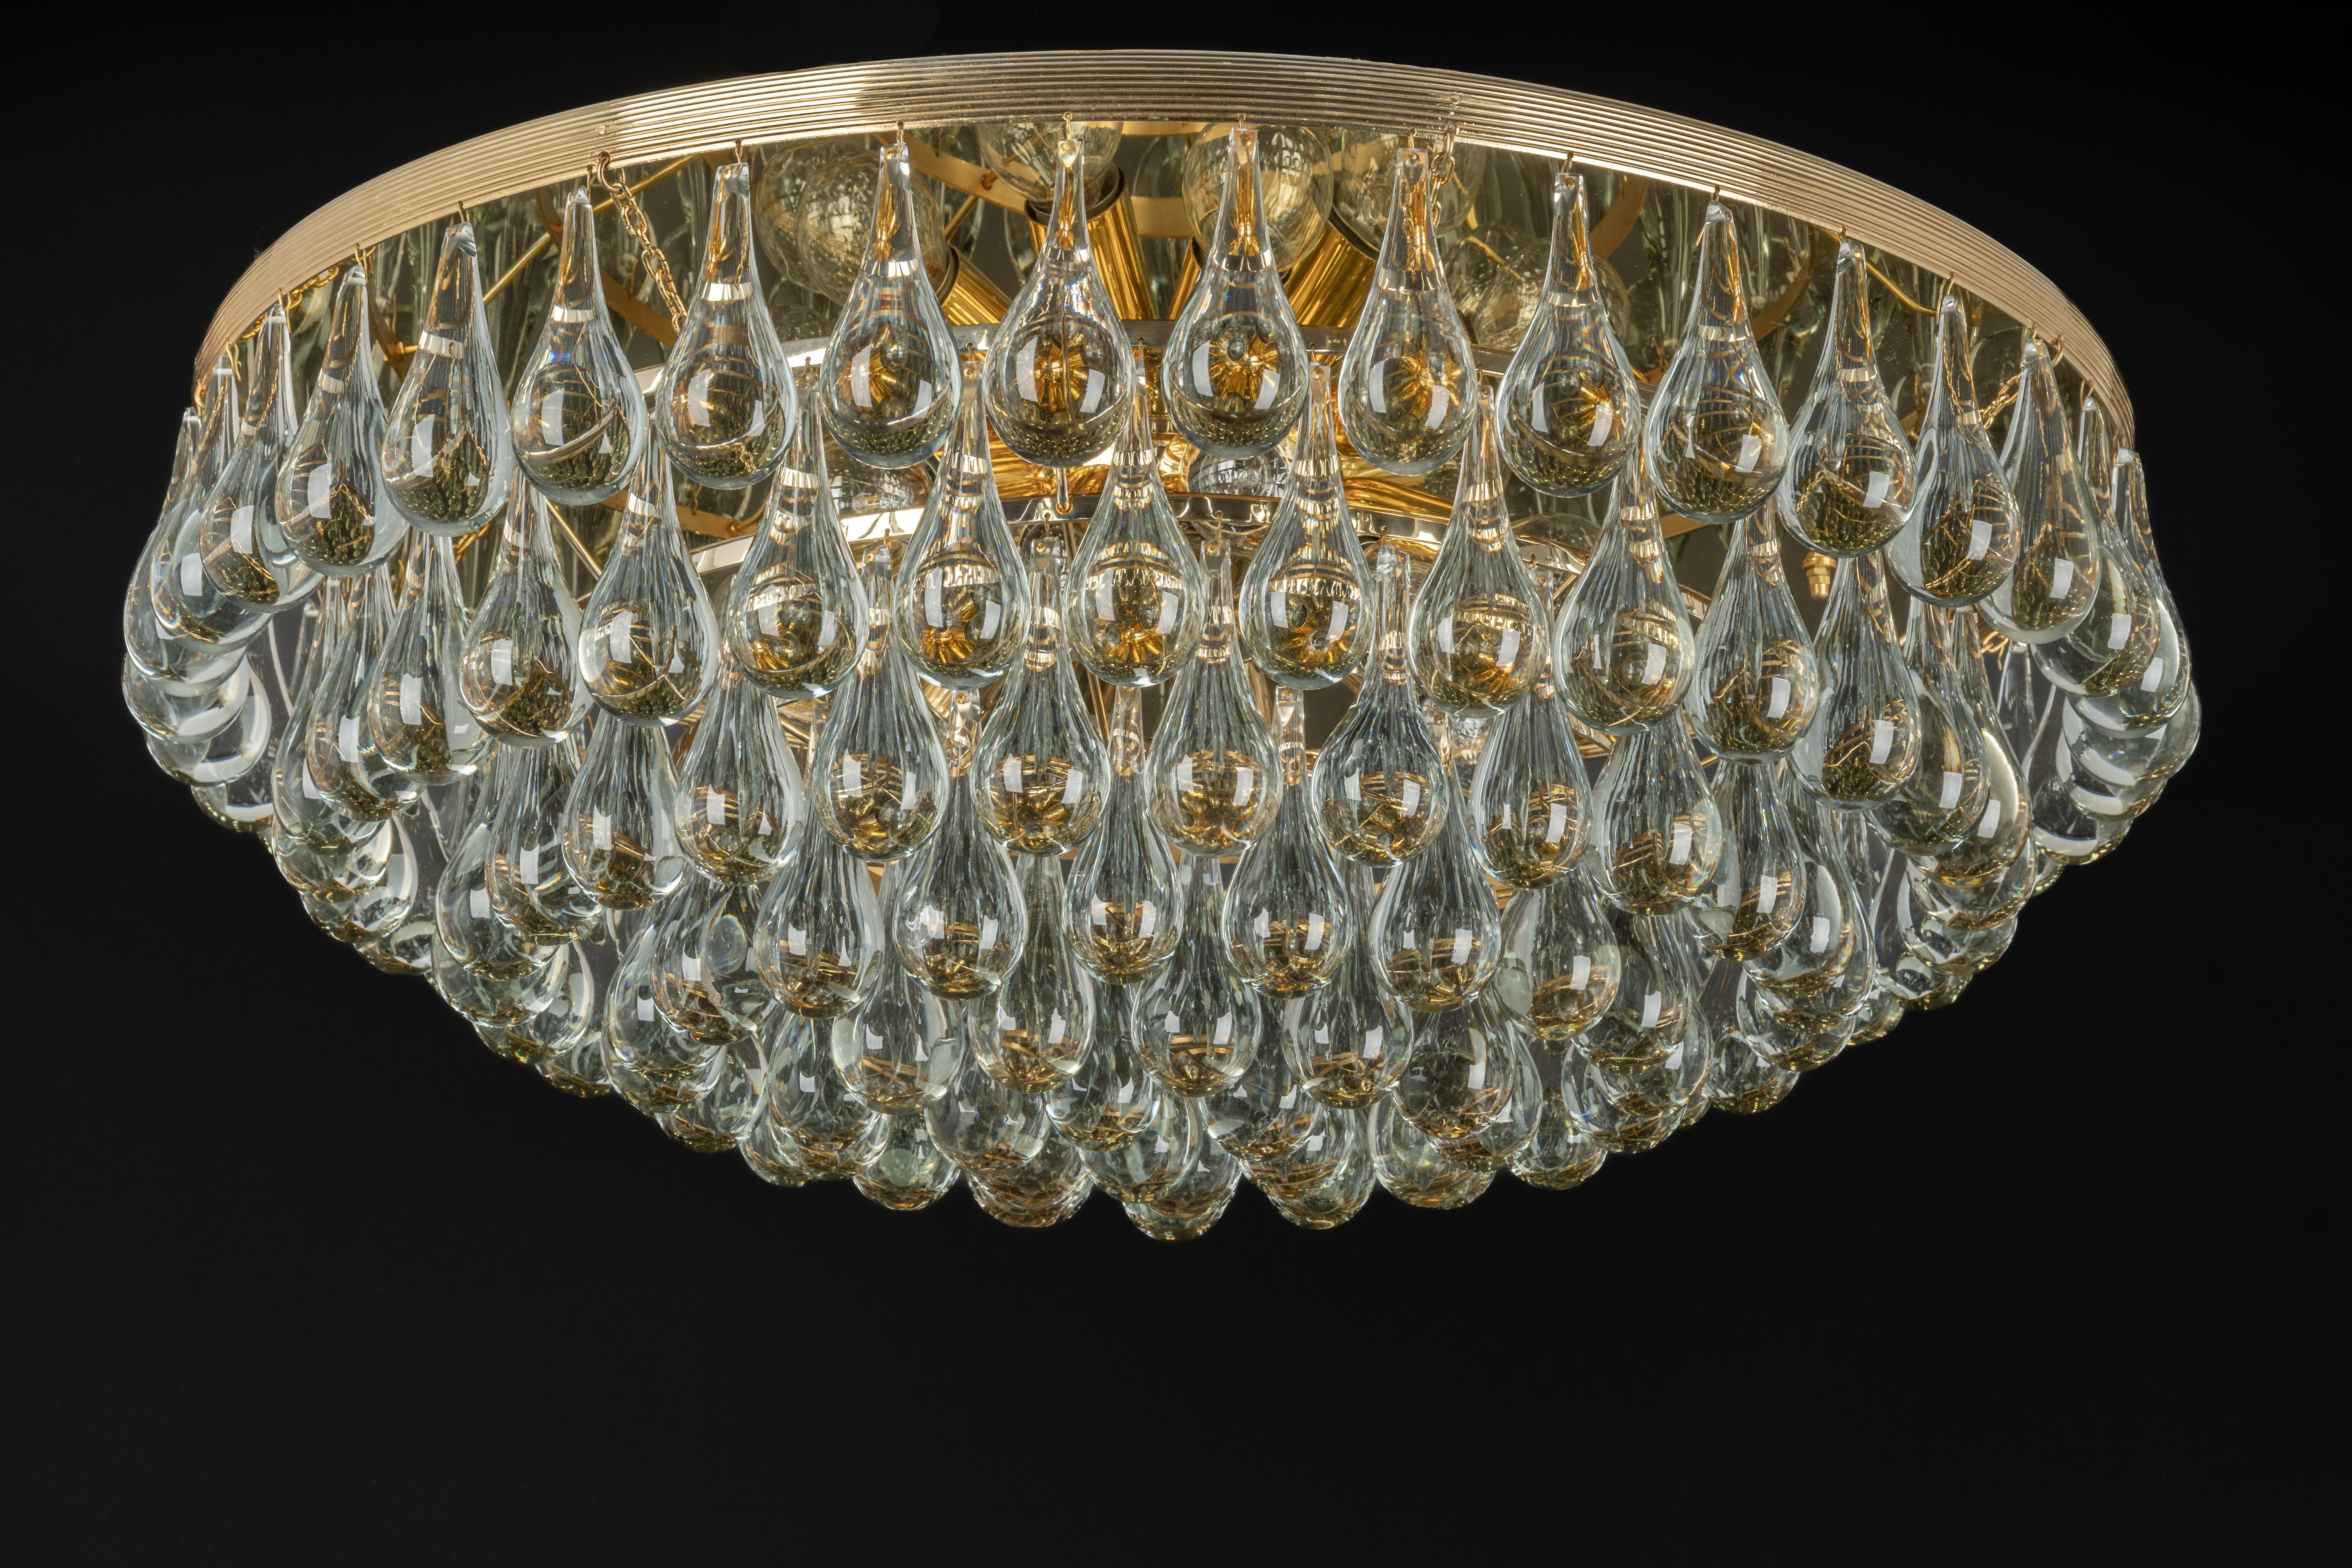 1 of 3 Large Murano Glass Tear Drop Chandelier by C.Palme, Germany, 1970s For Sale 2